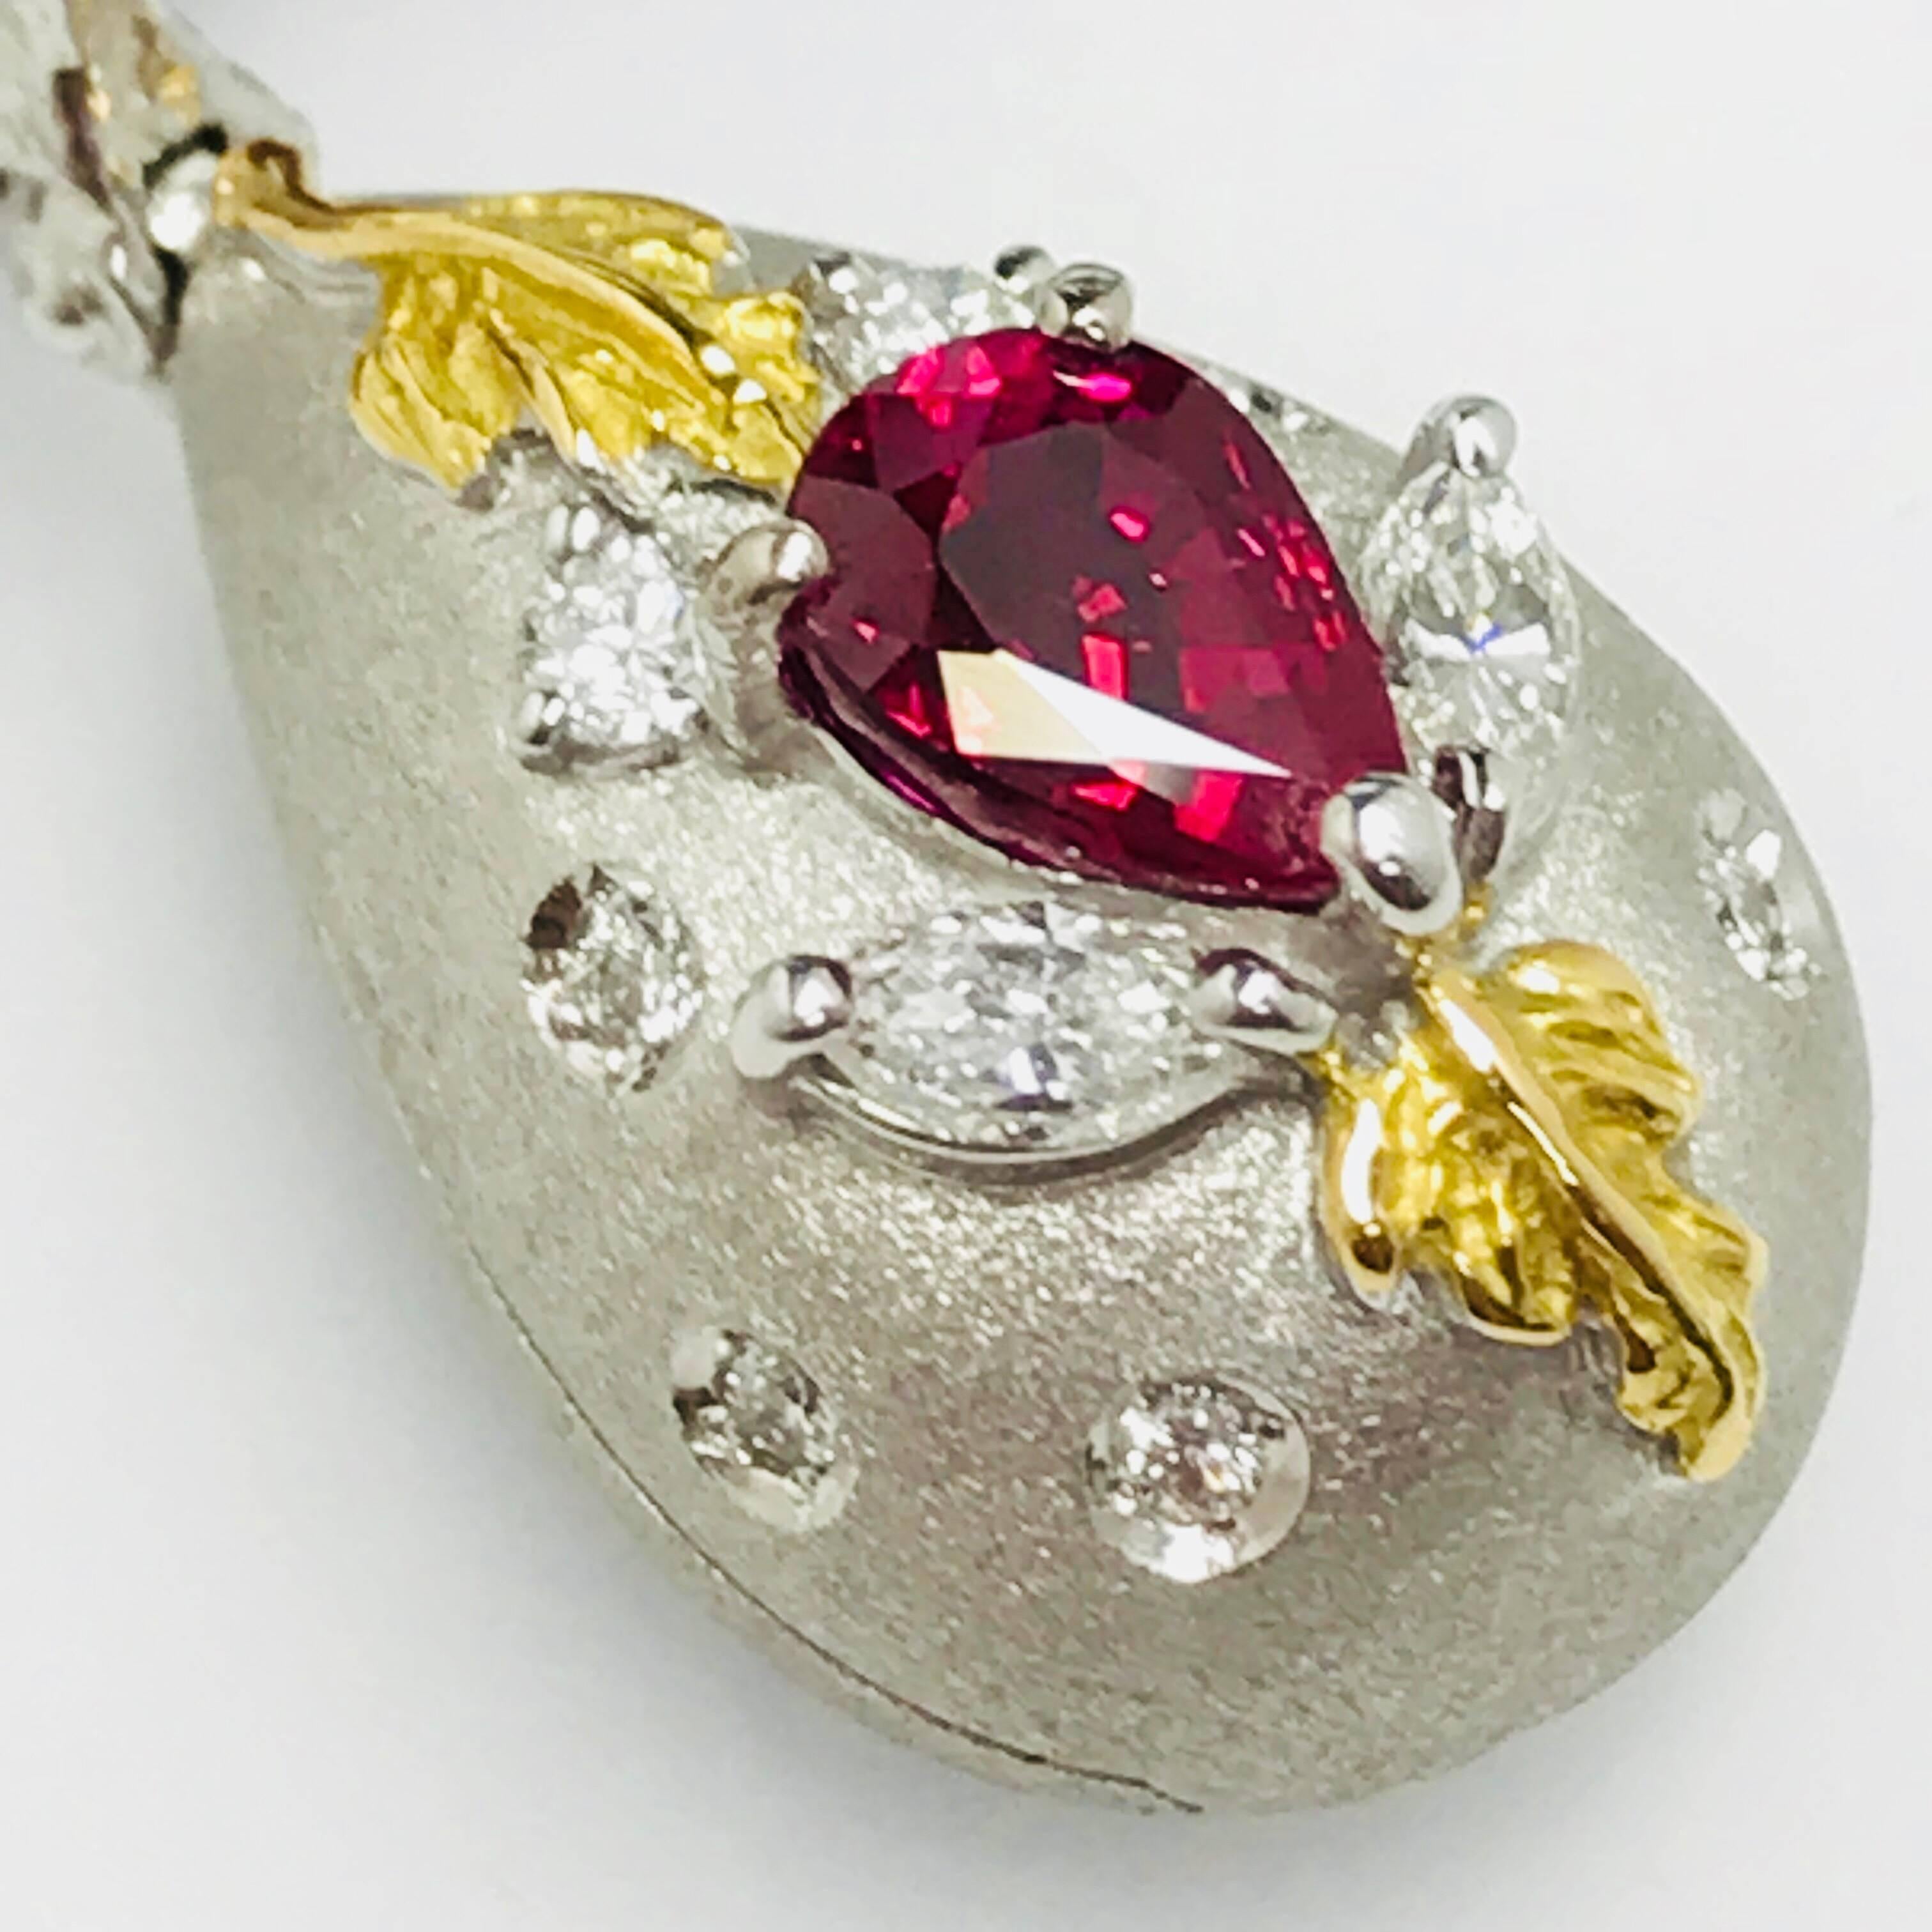 All buyers outside of Japan will receive -10% tax exemption from the list price. 
Please inquire for details.
Ruby : 0.67ct / Diamonds : 0.27ct
Beads Necklace : Ruby 48ct / K18WG with magnetic clasp(50cm) 
Unique Piece / Brand New Condition
All hand